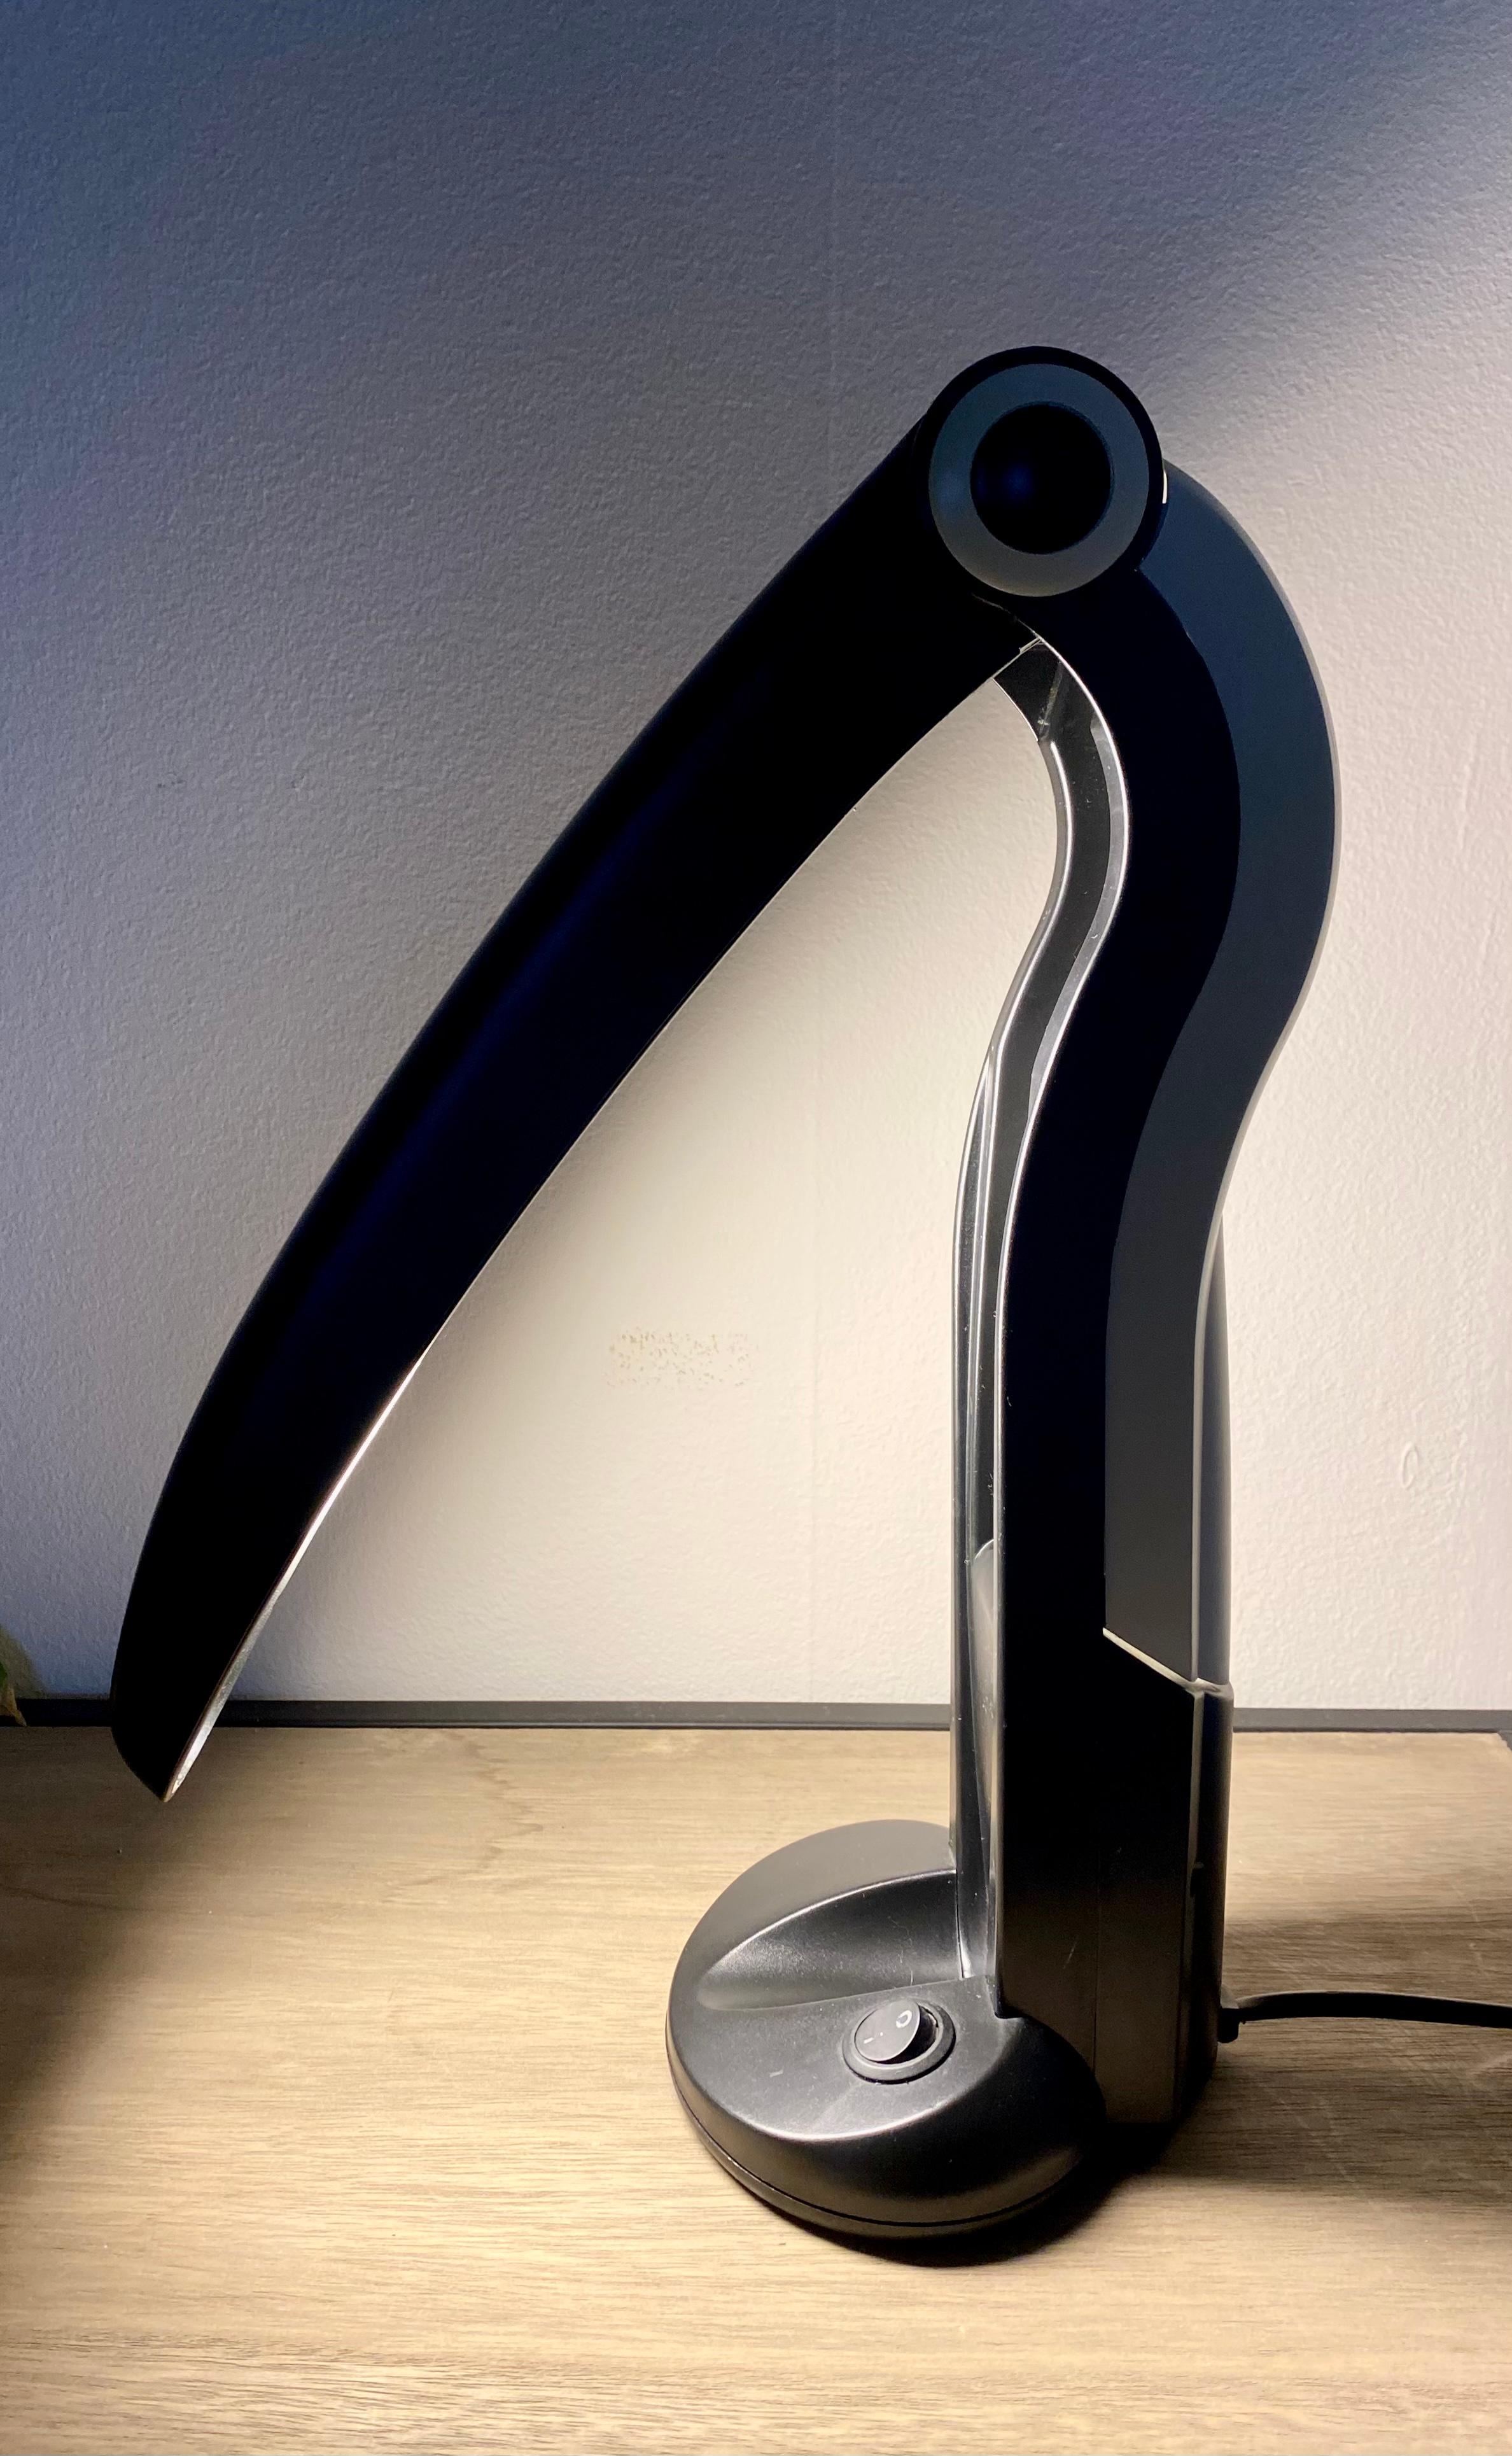 Toucan / Pelican Table Lamp or Desk Lamp by H.T. Huang, ca. 1980s In Good Condition For Sale In Schagen, NL